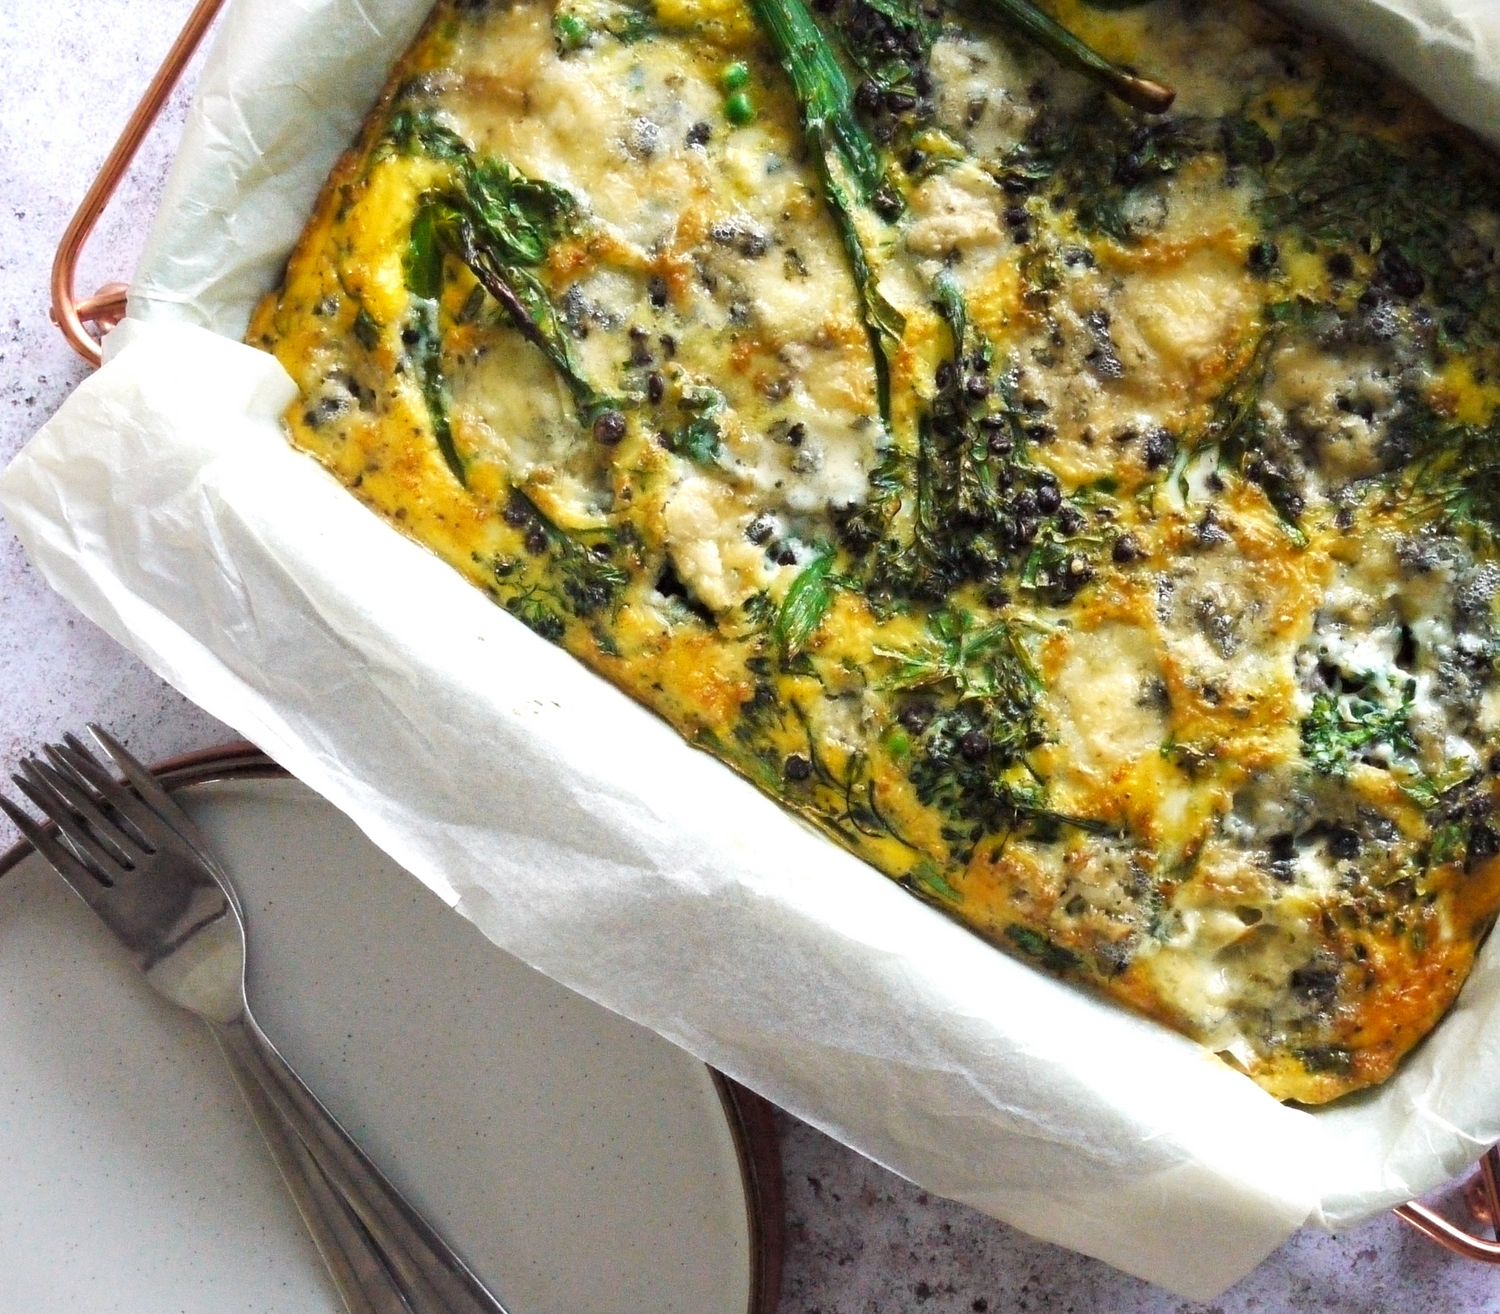 Oven-Baked Frittata With Peas, Puy Lentils & Broccoli - Laura Tilt